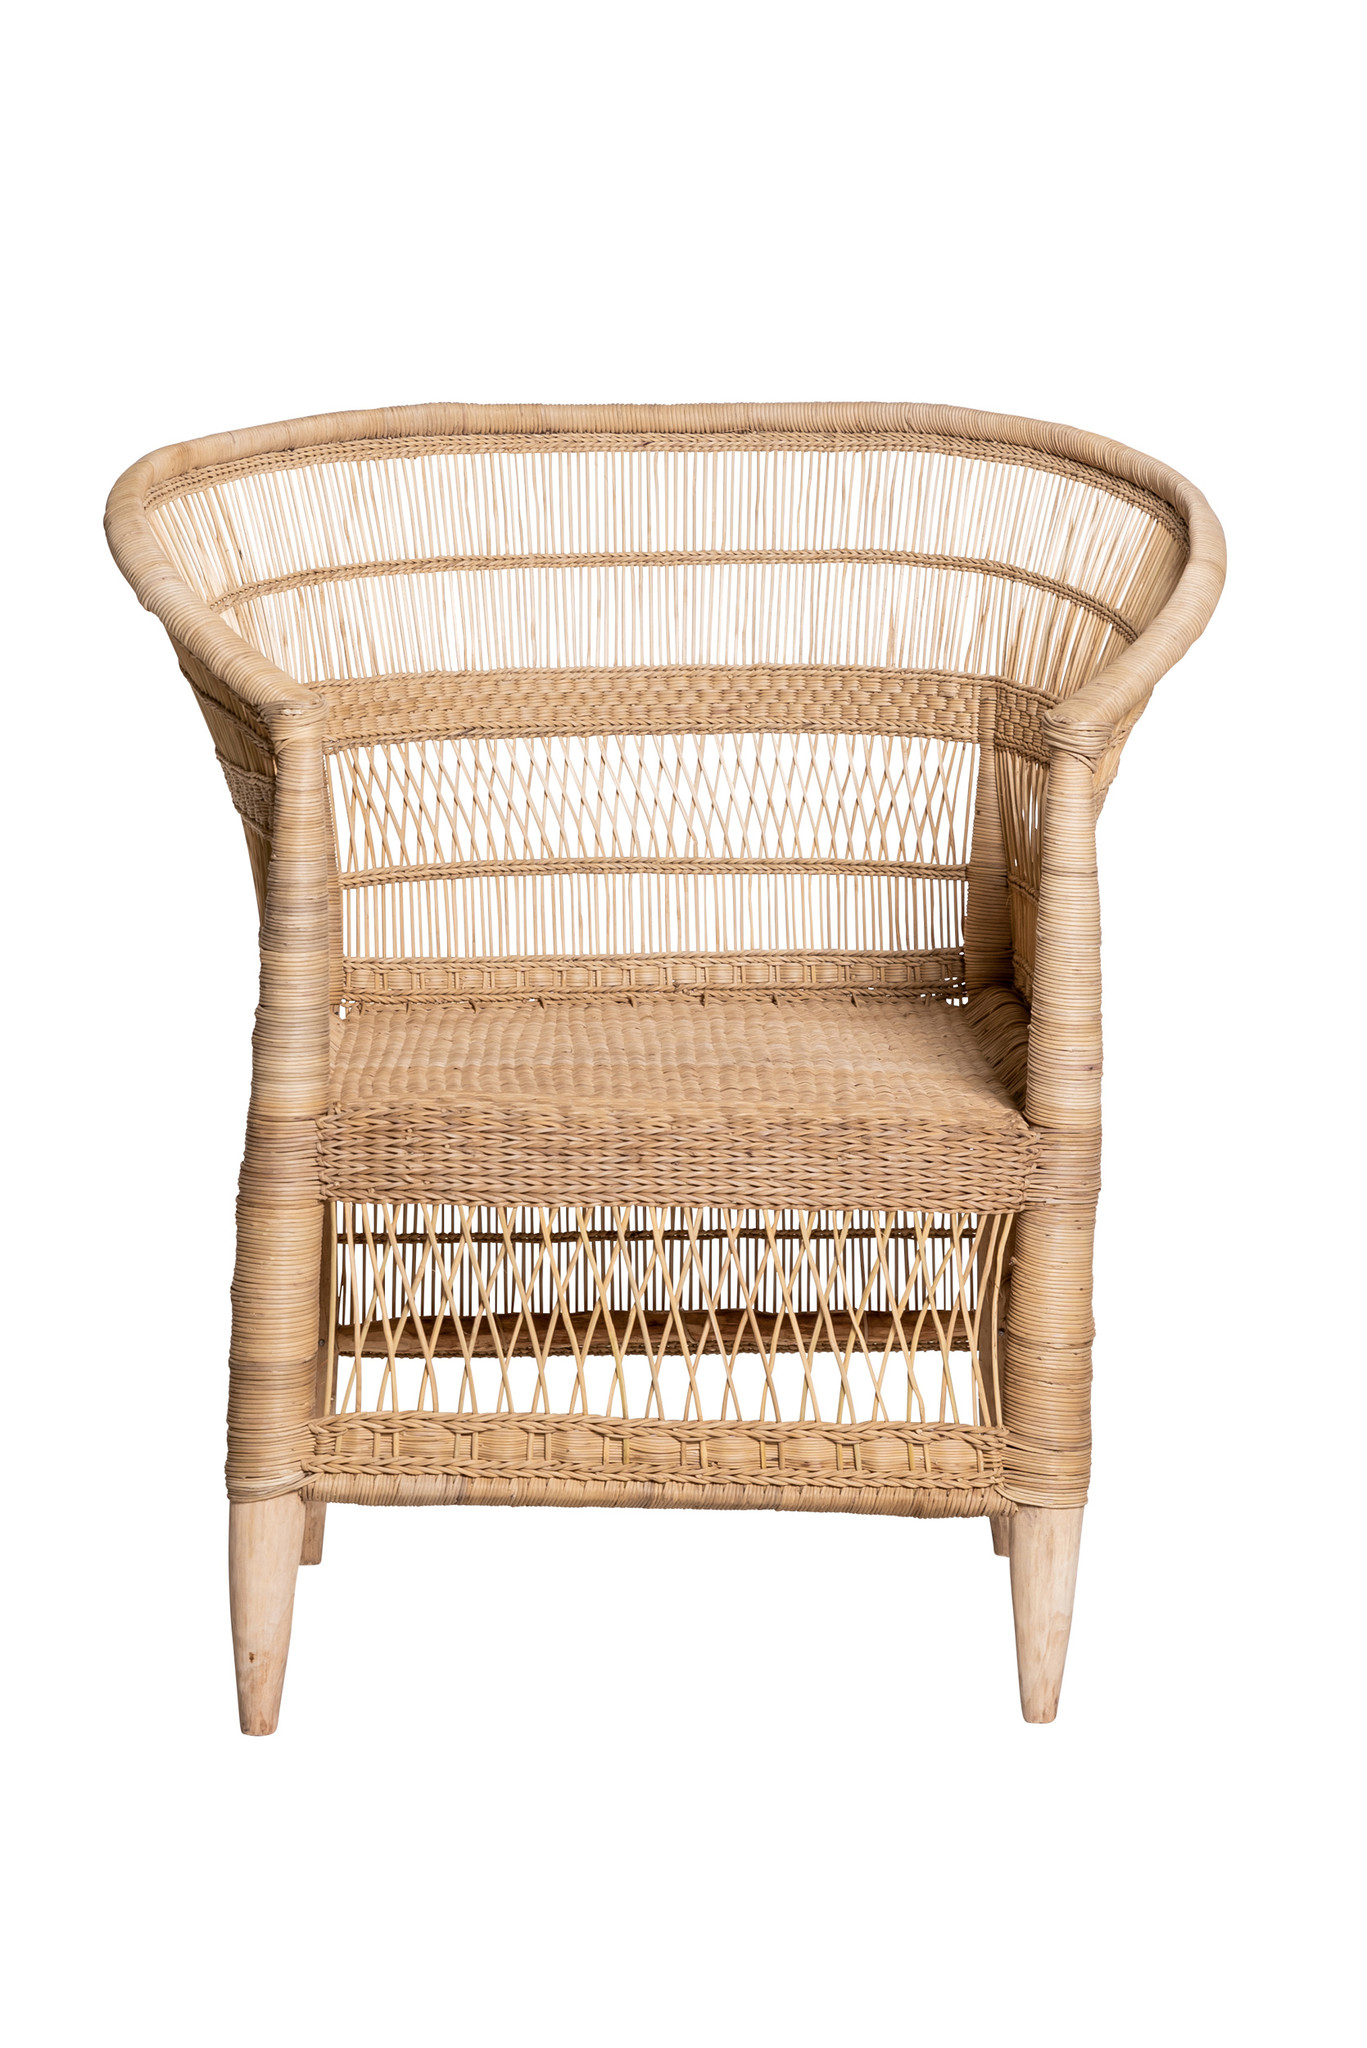 Couleur Locale Malawi Chair Natural, Can Bamboo Furniture Be Left Outside